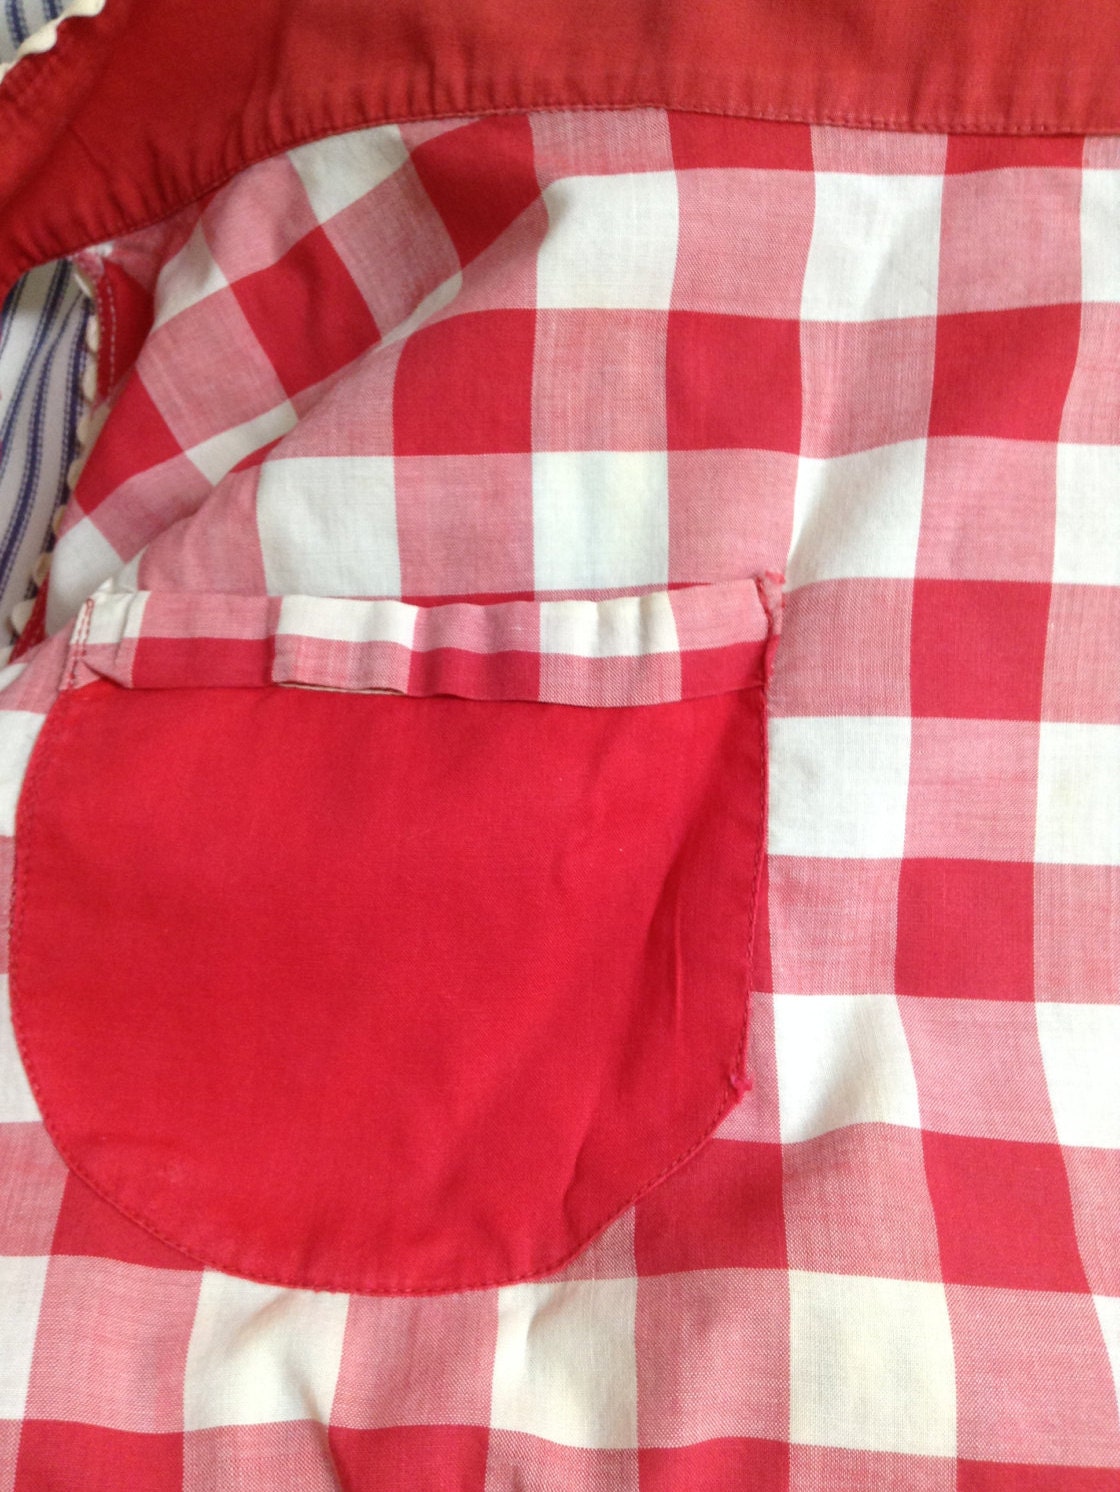 Vintage Red Check Apron Gingham Apron Vintage Decor Country